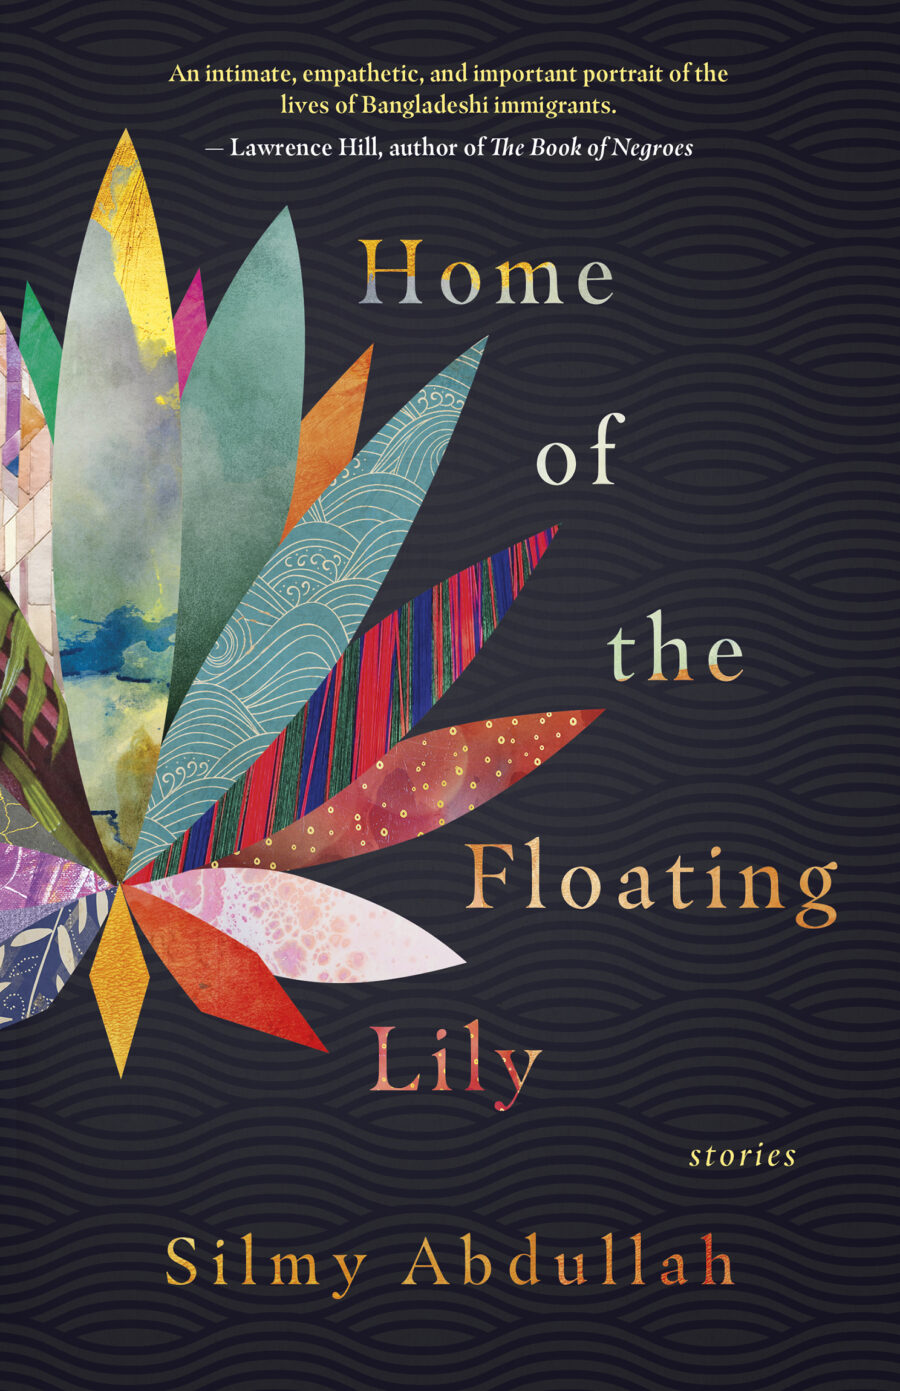 Cover photo of Home of the Floating Lily, showing the image of a lily flower in colourful watercolor, before a black backdrop.